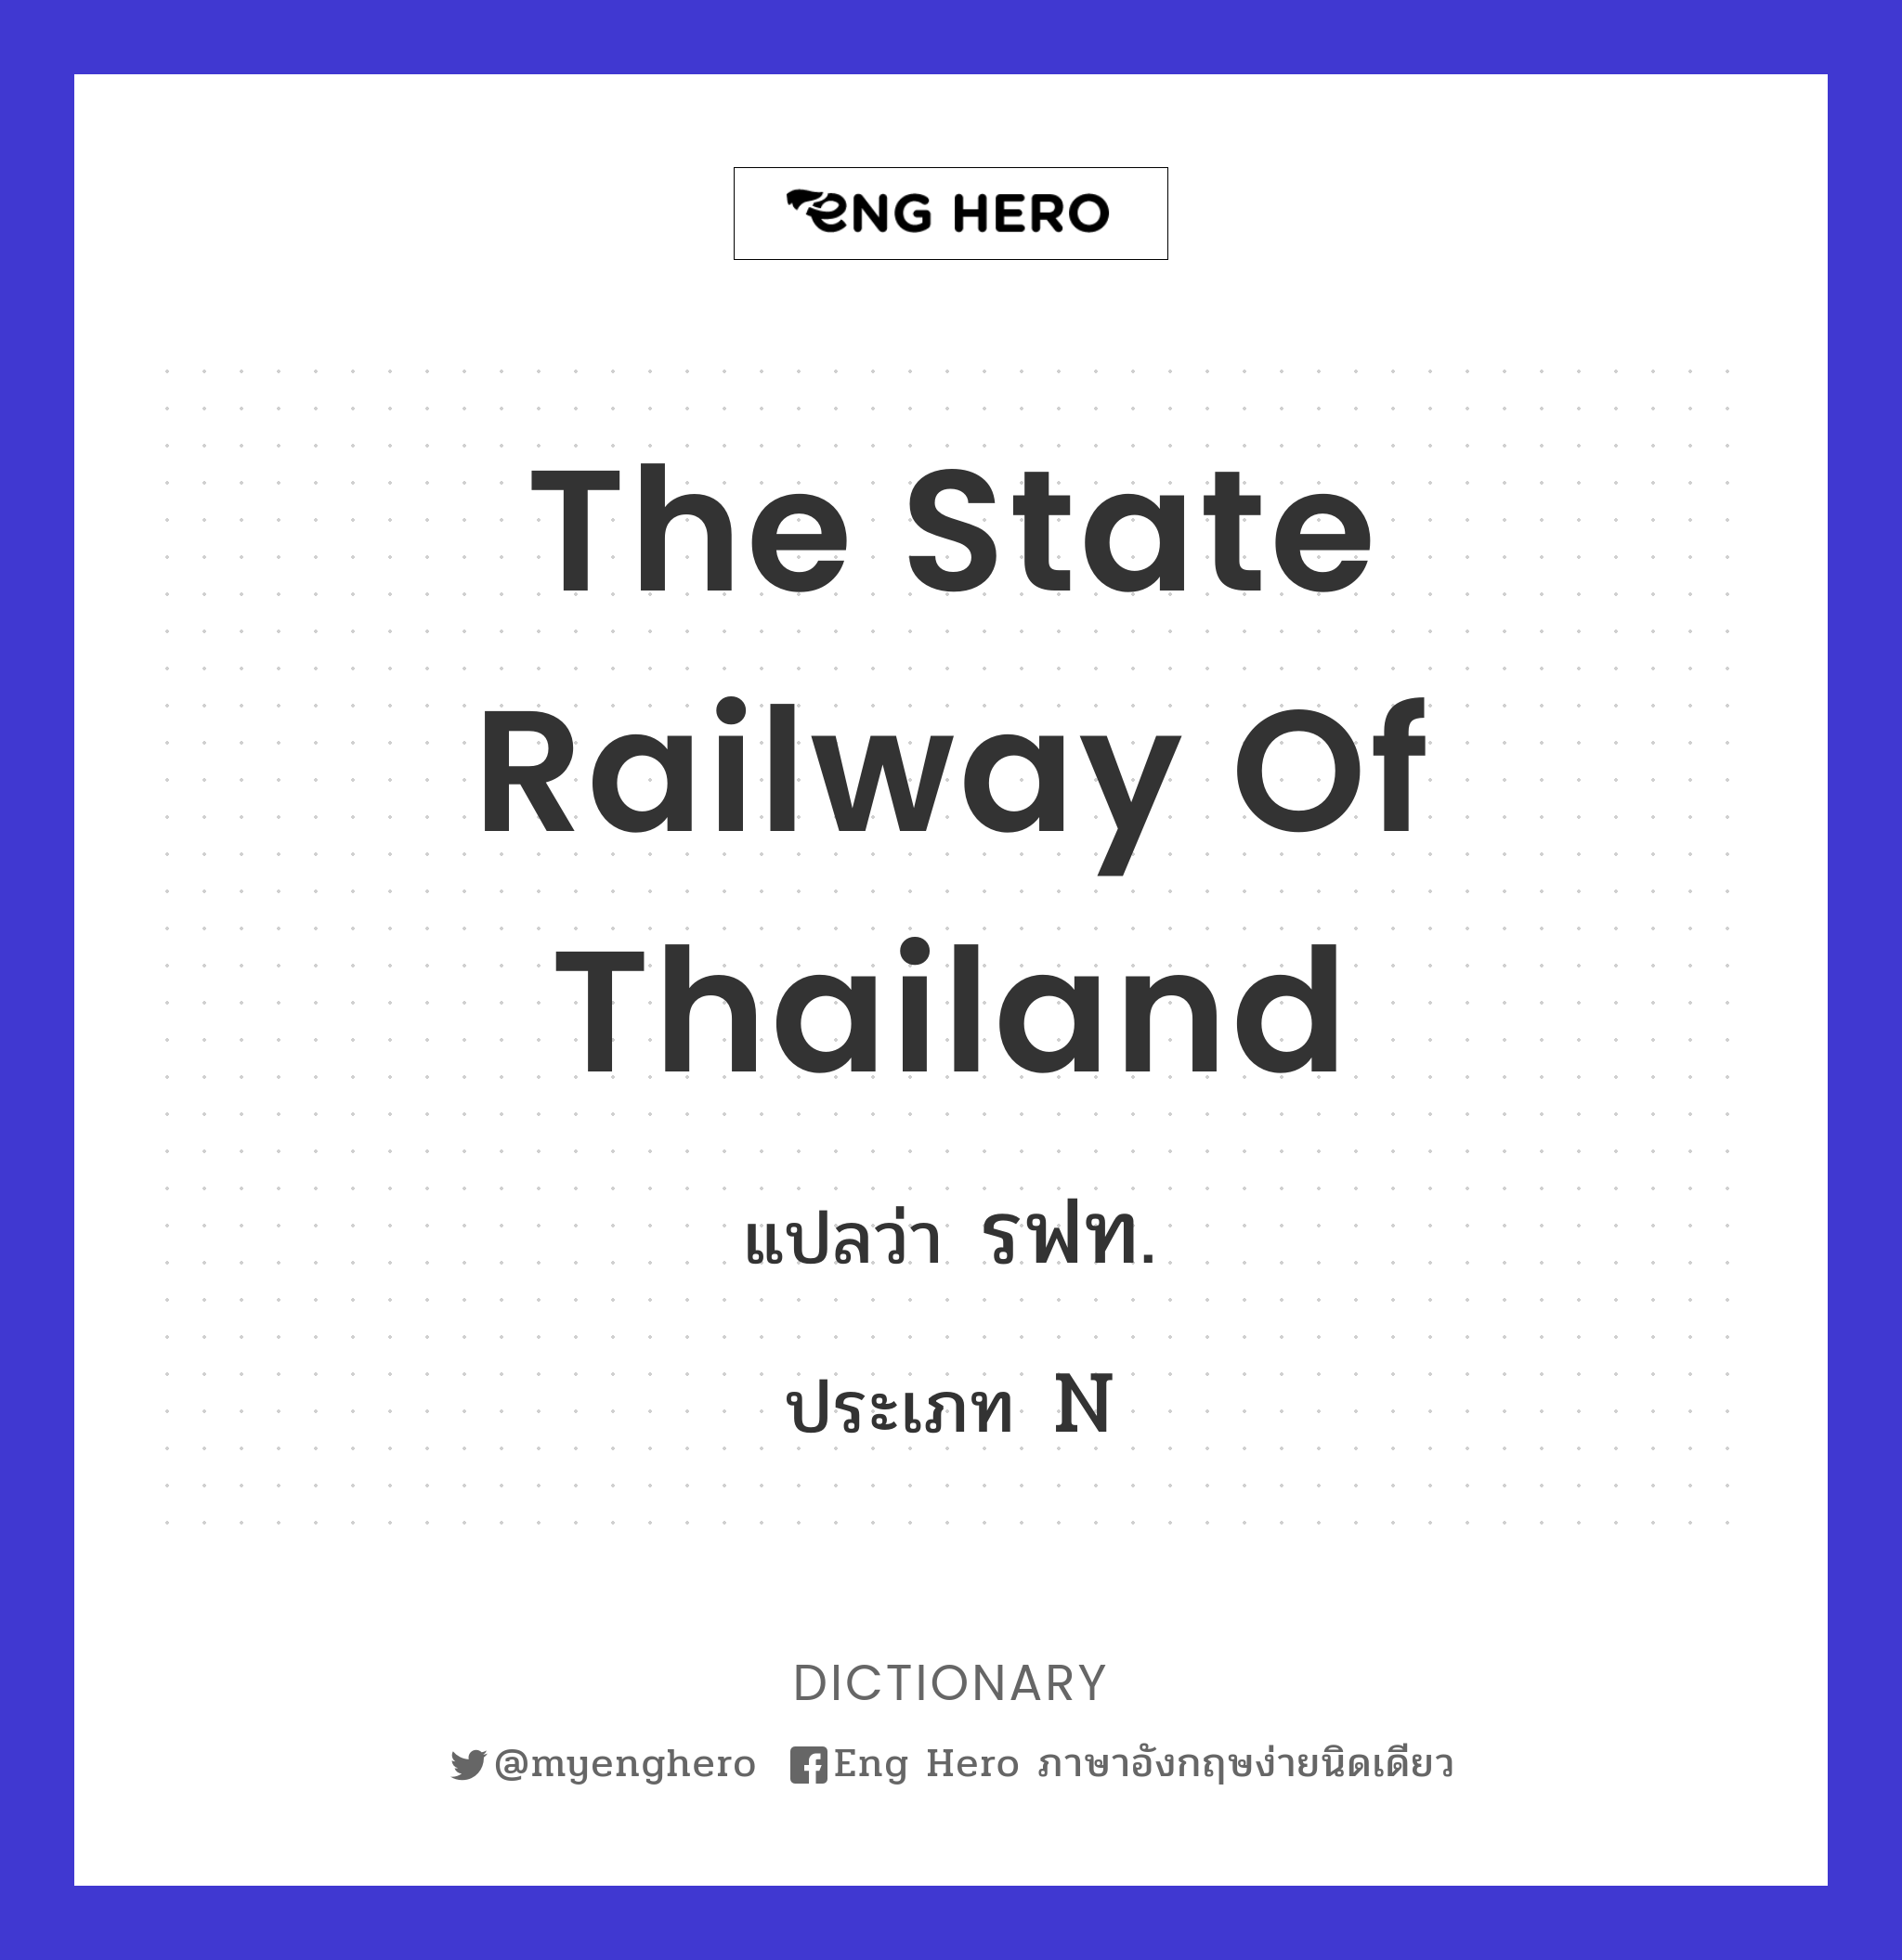 The State Railway of Thailand